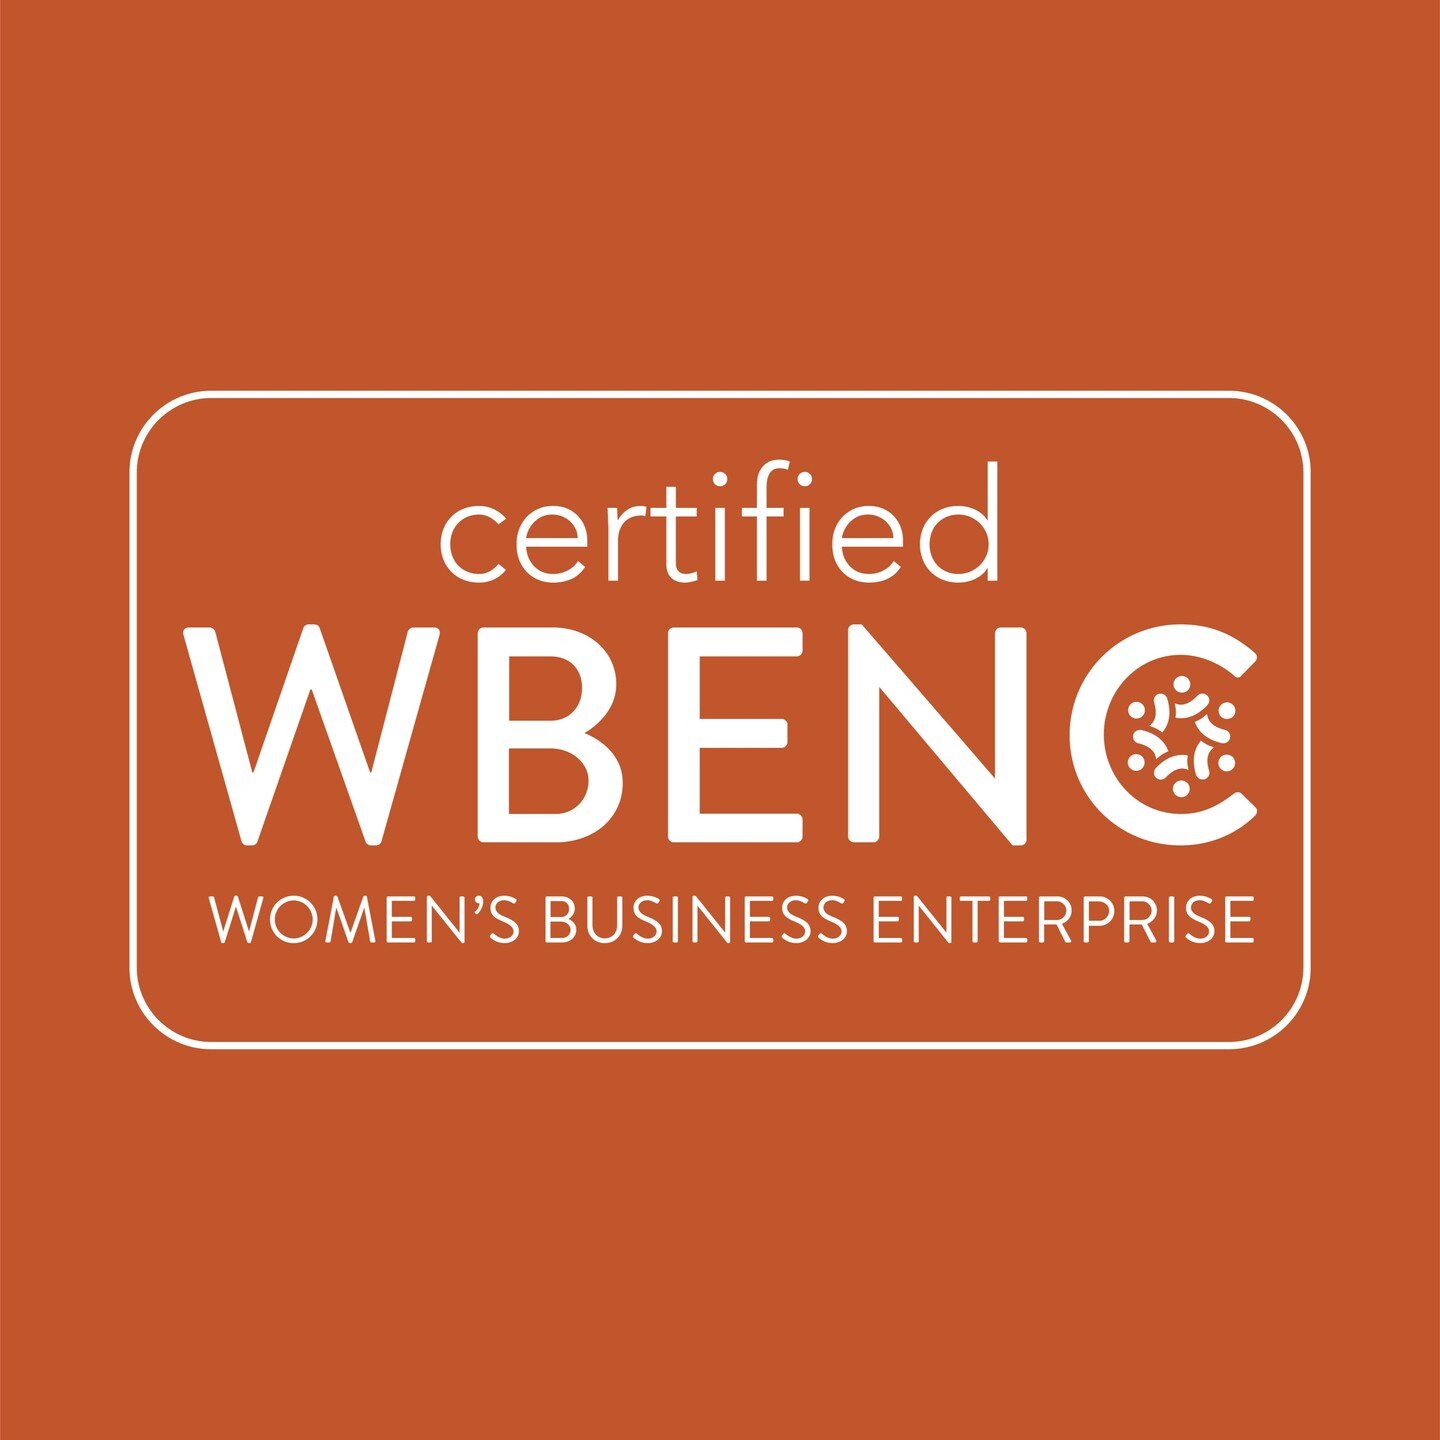 Miles Design Co. is officially a WBENC-Certified Women's Business Enterprise!

Through this comprehensive certification, WBENC provides credibility, resources, and visibility to women-owned businesses. Miles Design is the only design firm in the area